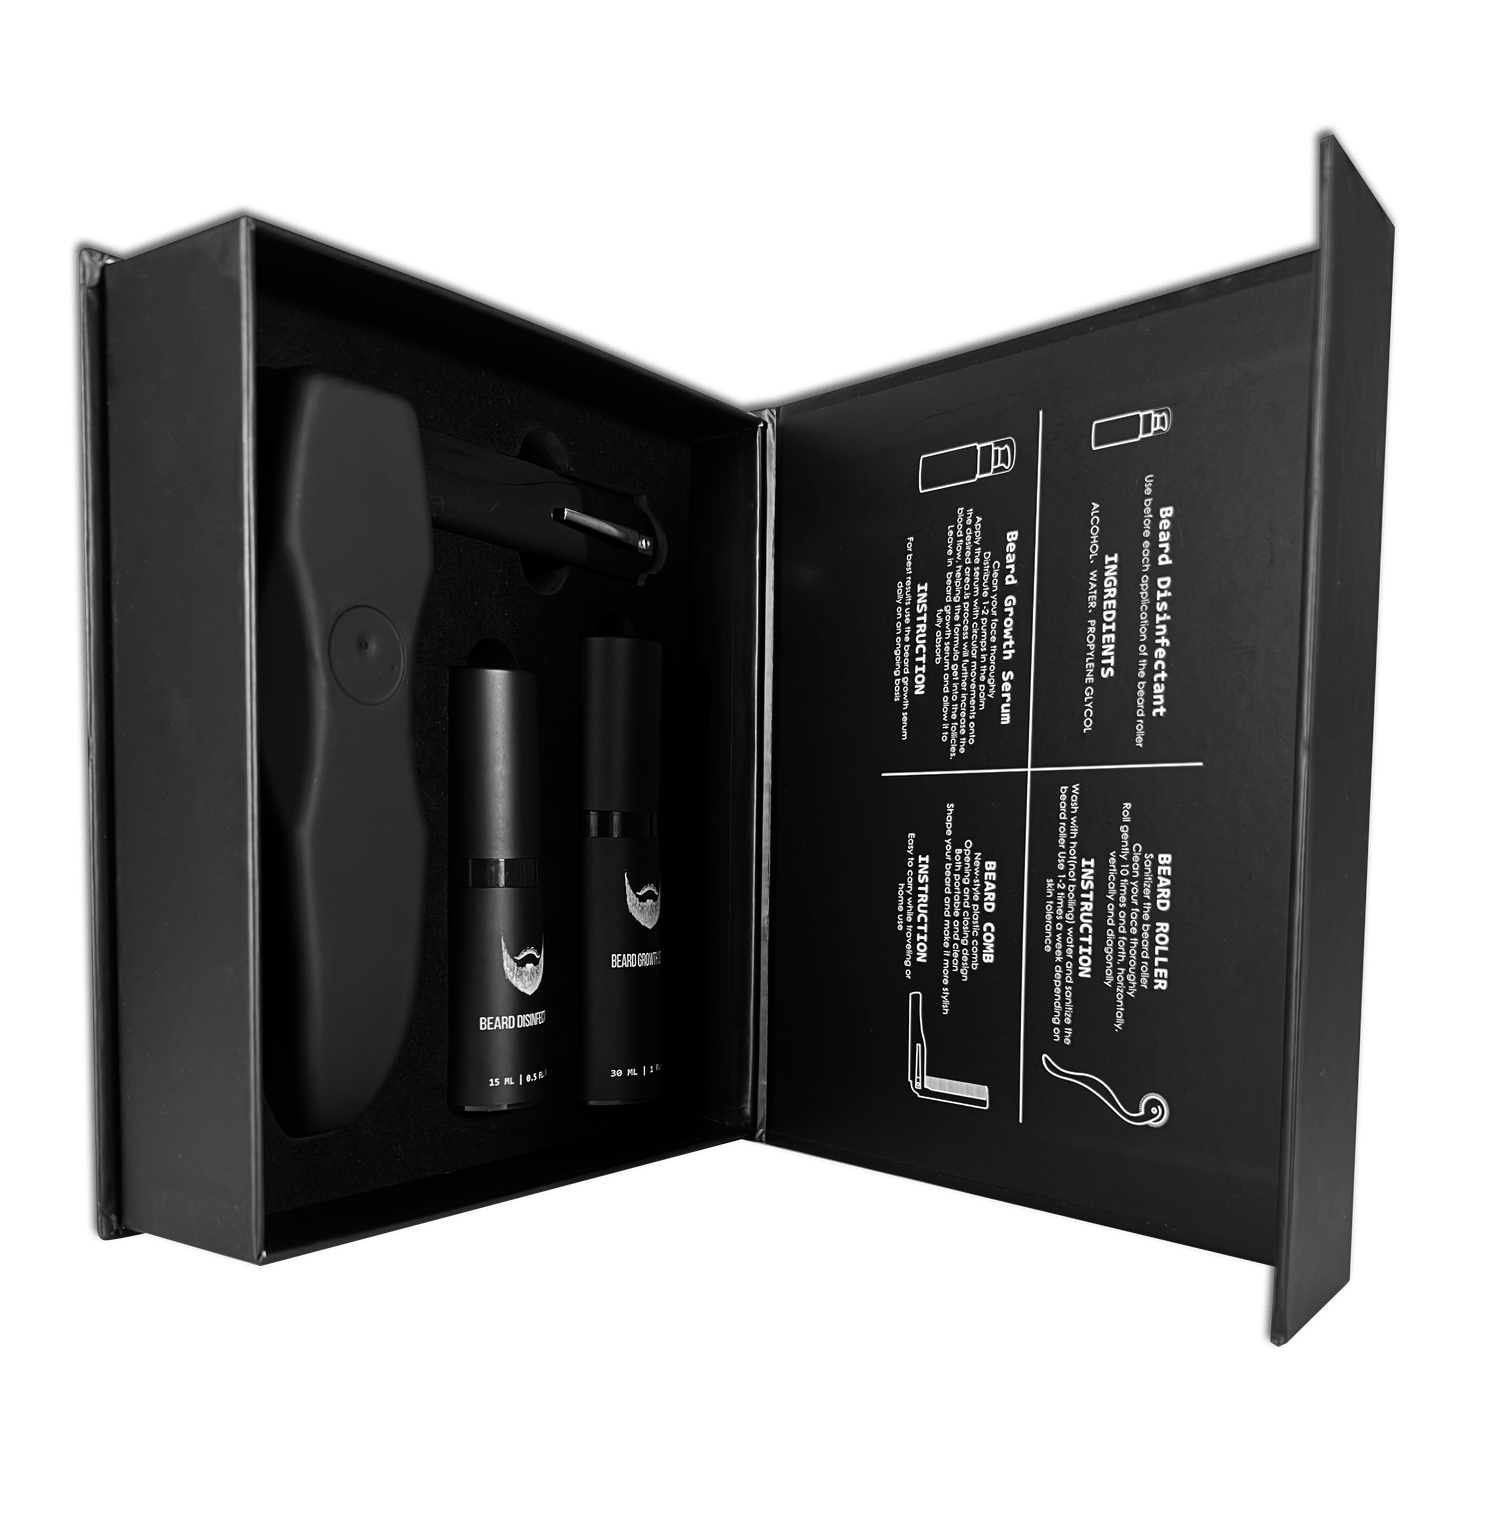 The beard growth kit that contains the derma beard roller and the beard oil serum, use it to get a thicker beard